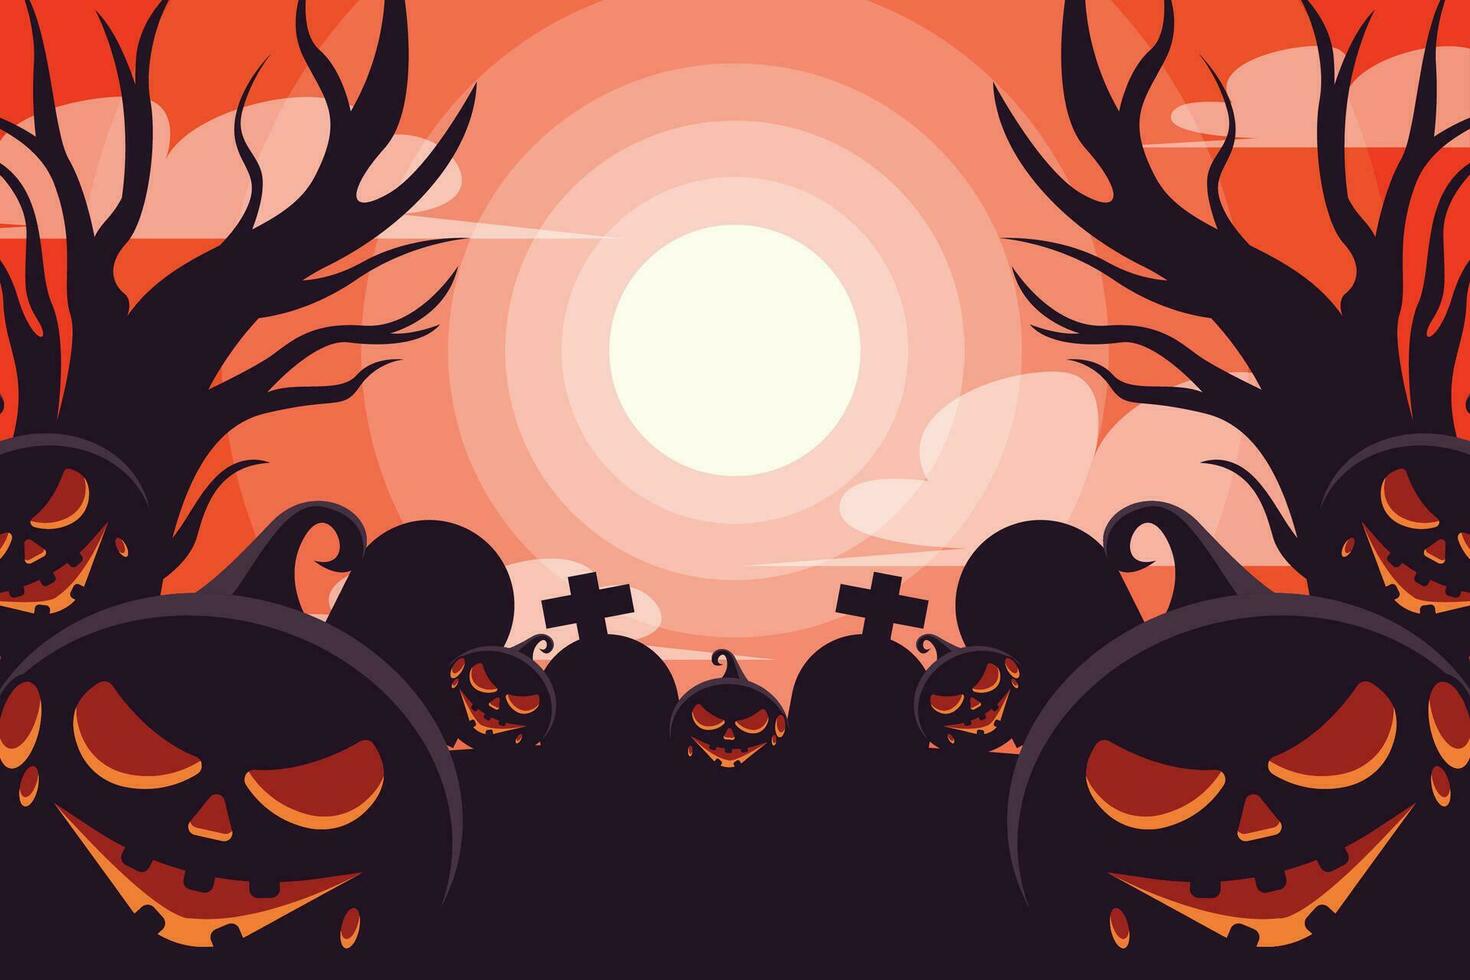 Halloween pumpkins, spooky trees and haunted house with moonlight on orange background. vector